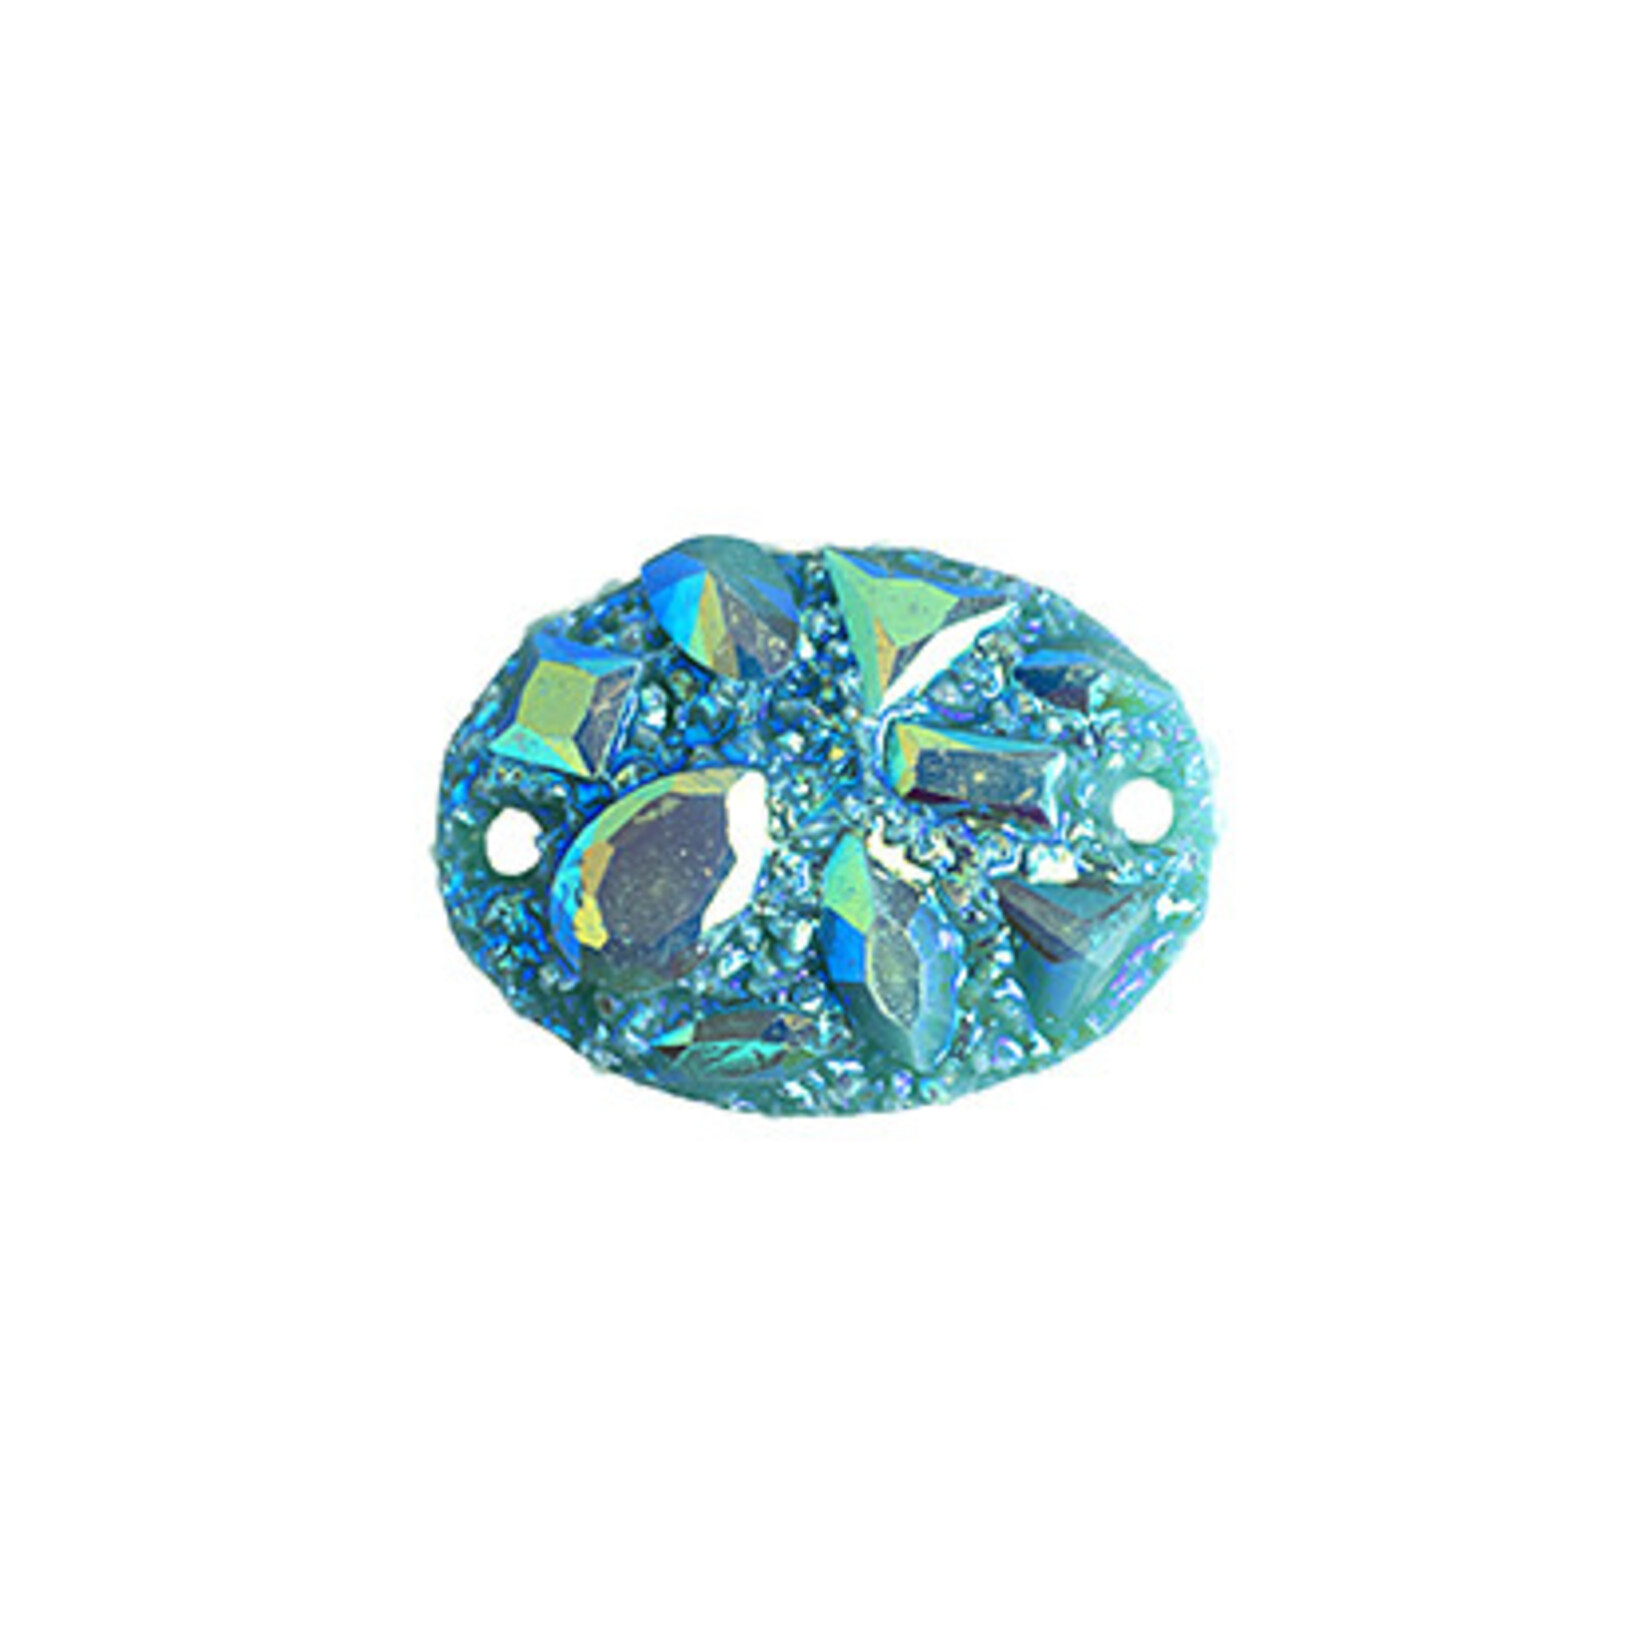 Moon Rock Resin Sew-On Stone 13 x 18 mm Oval (10 Pieces)